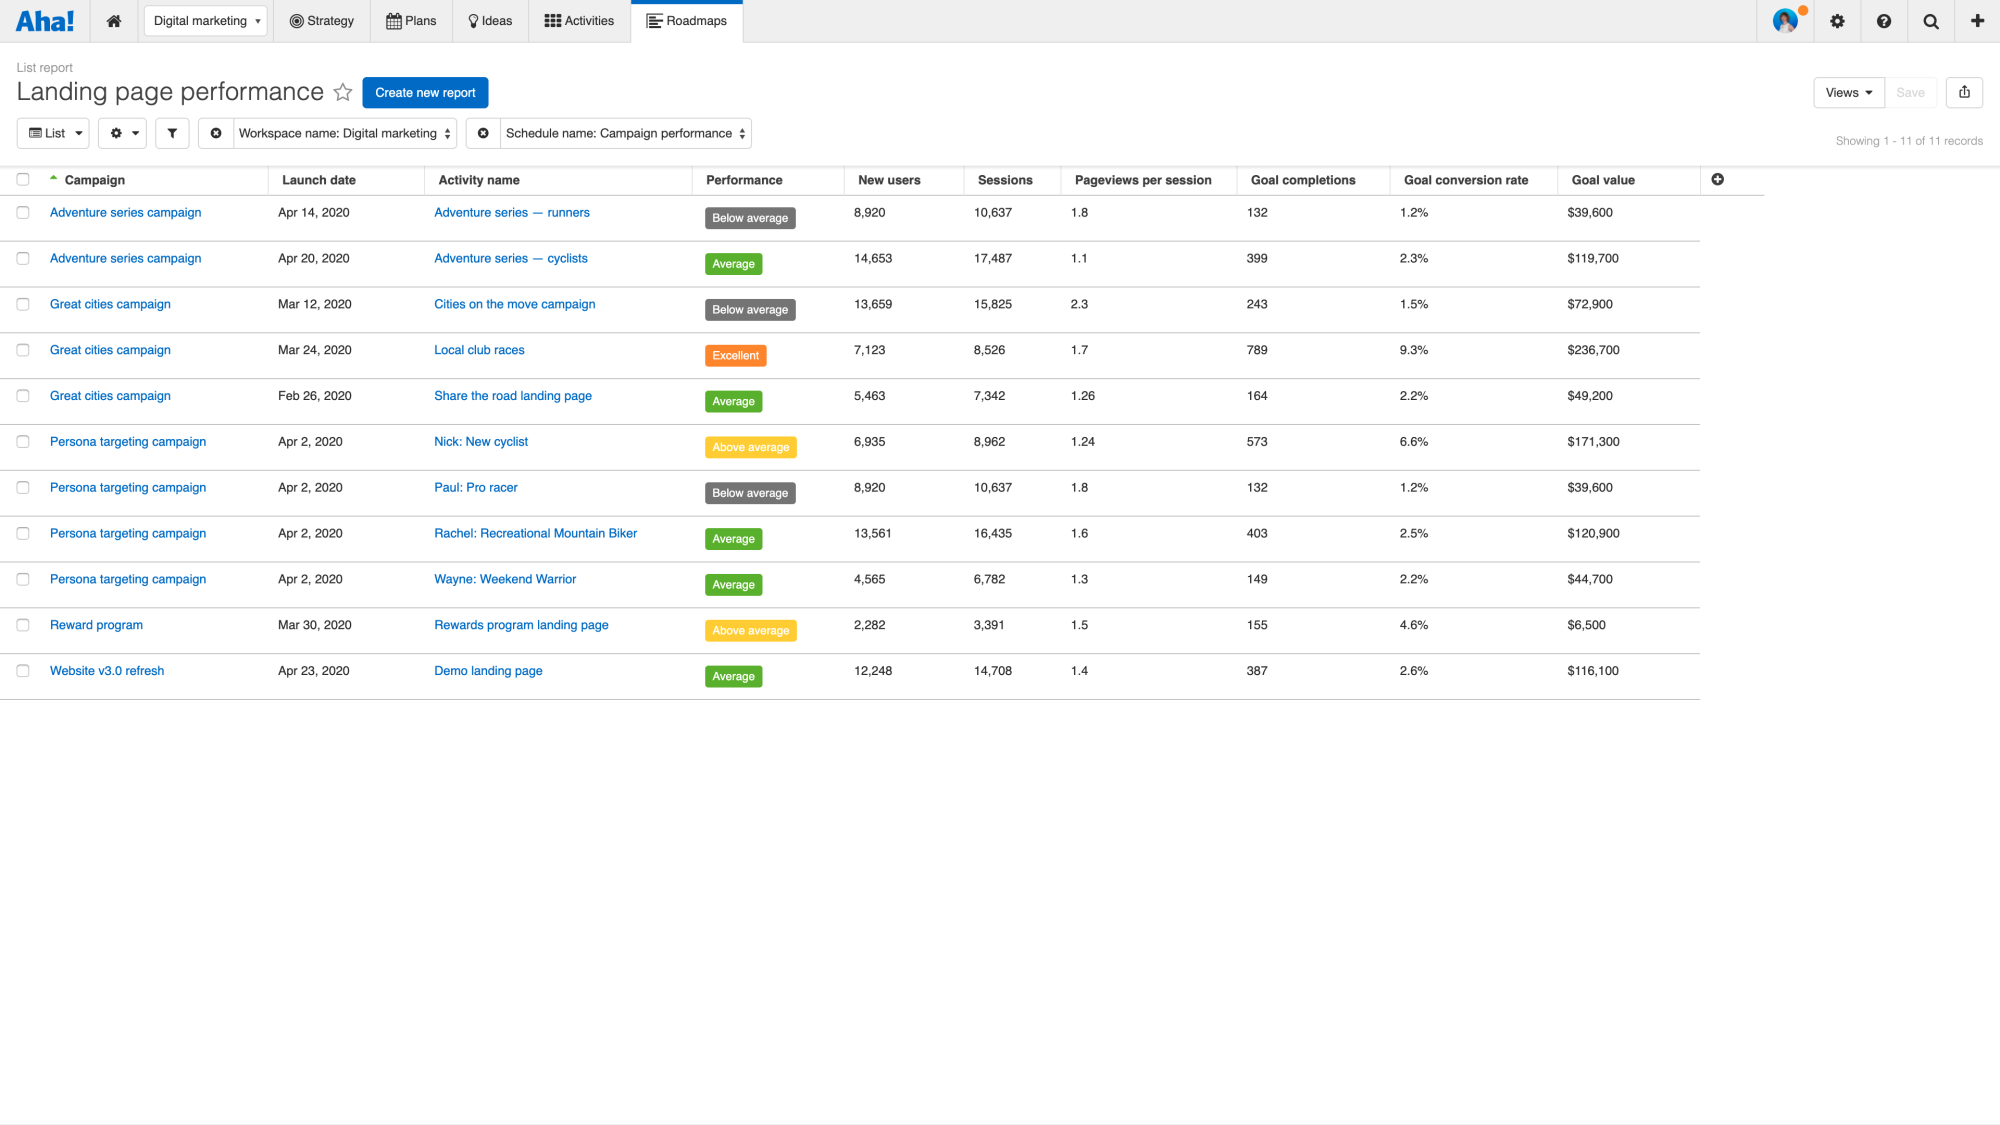 Report on engagement data from Google Analytics in your Aha! charts and reports.